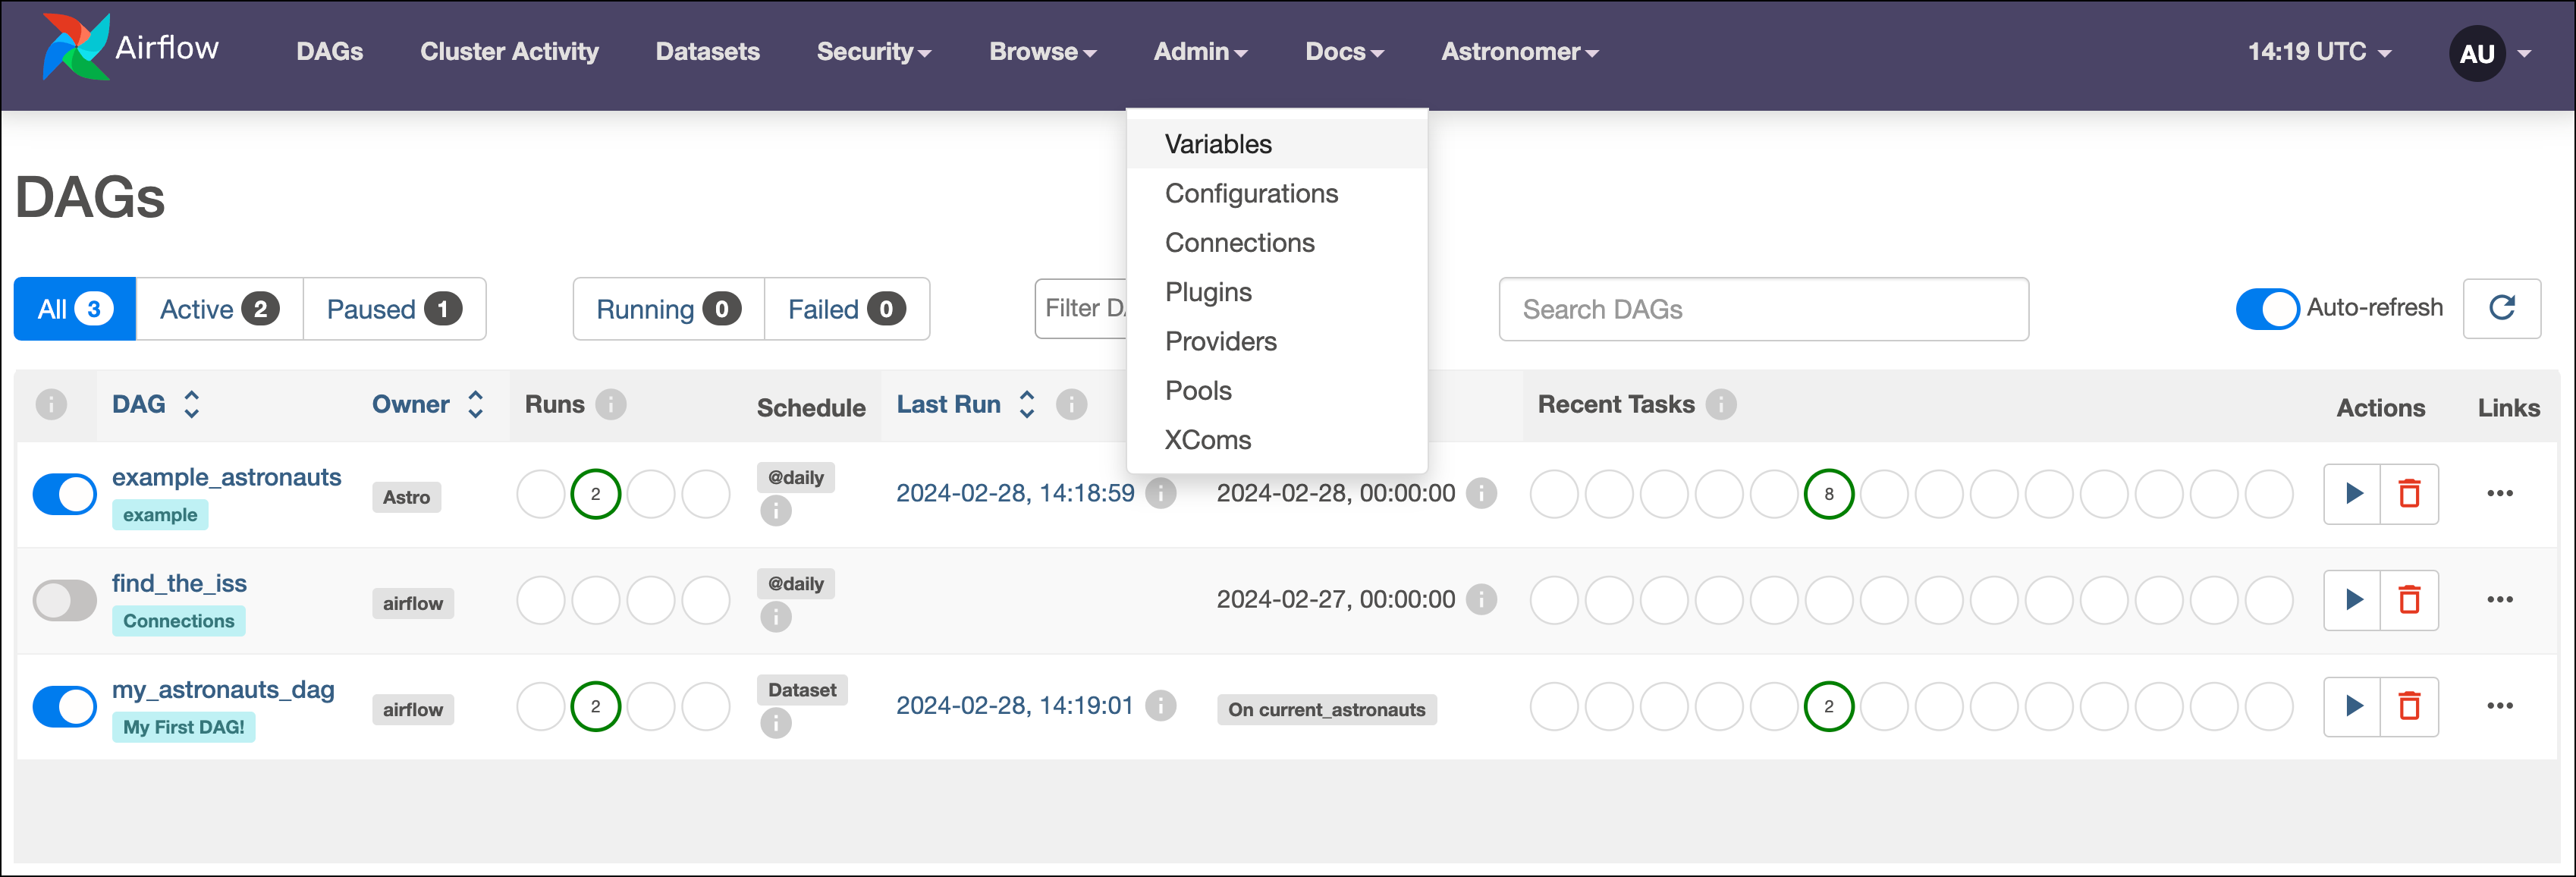 Screenshot of the Airflow UI with the Admin tab menu expanded to show the Variables option.